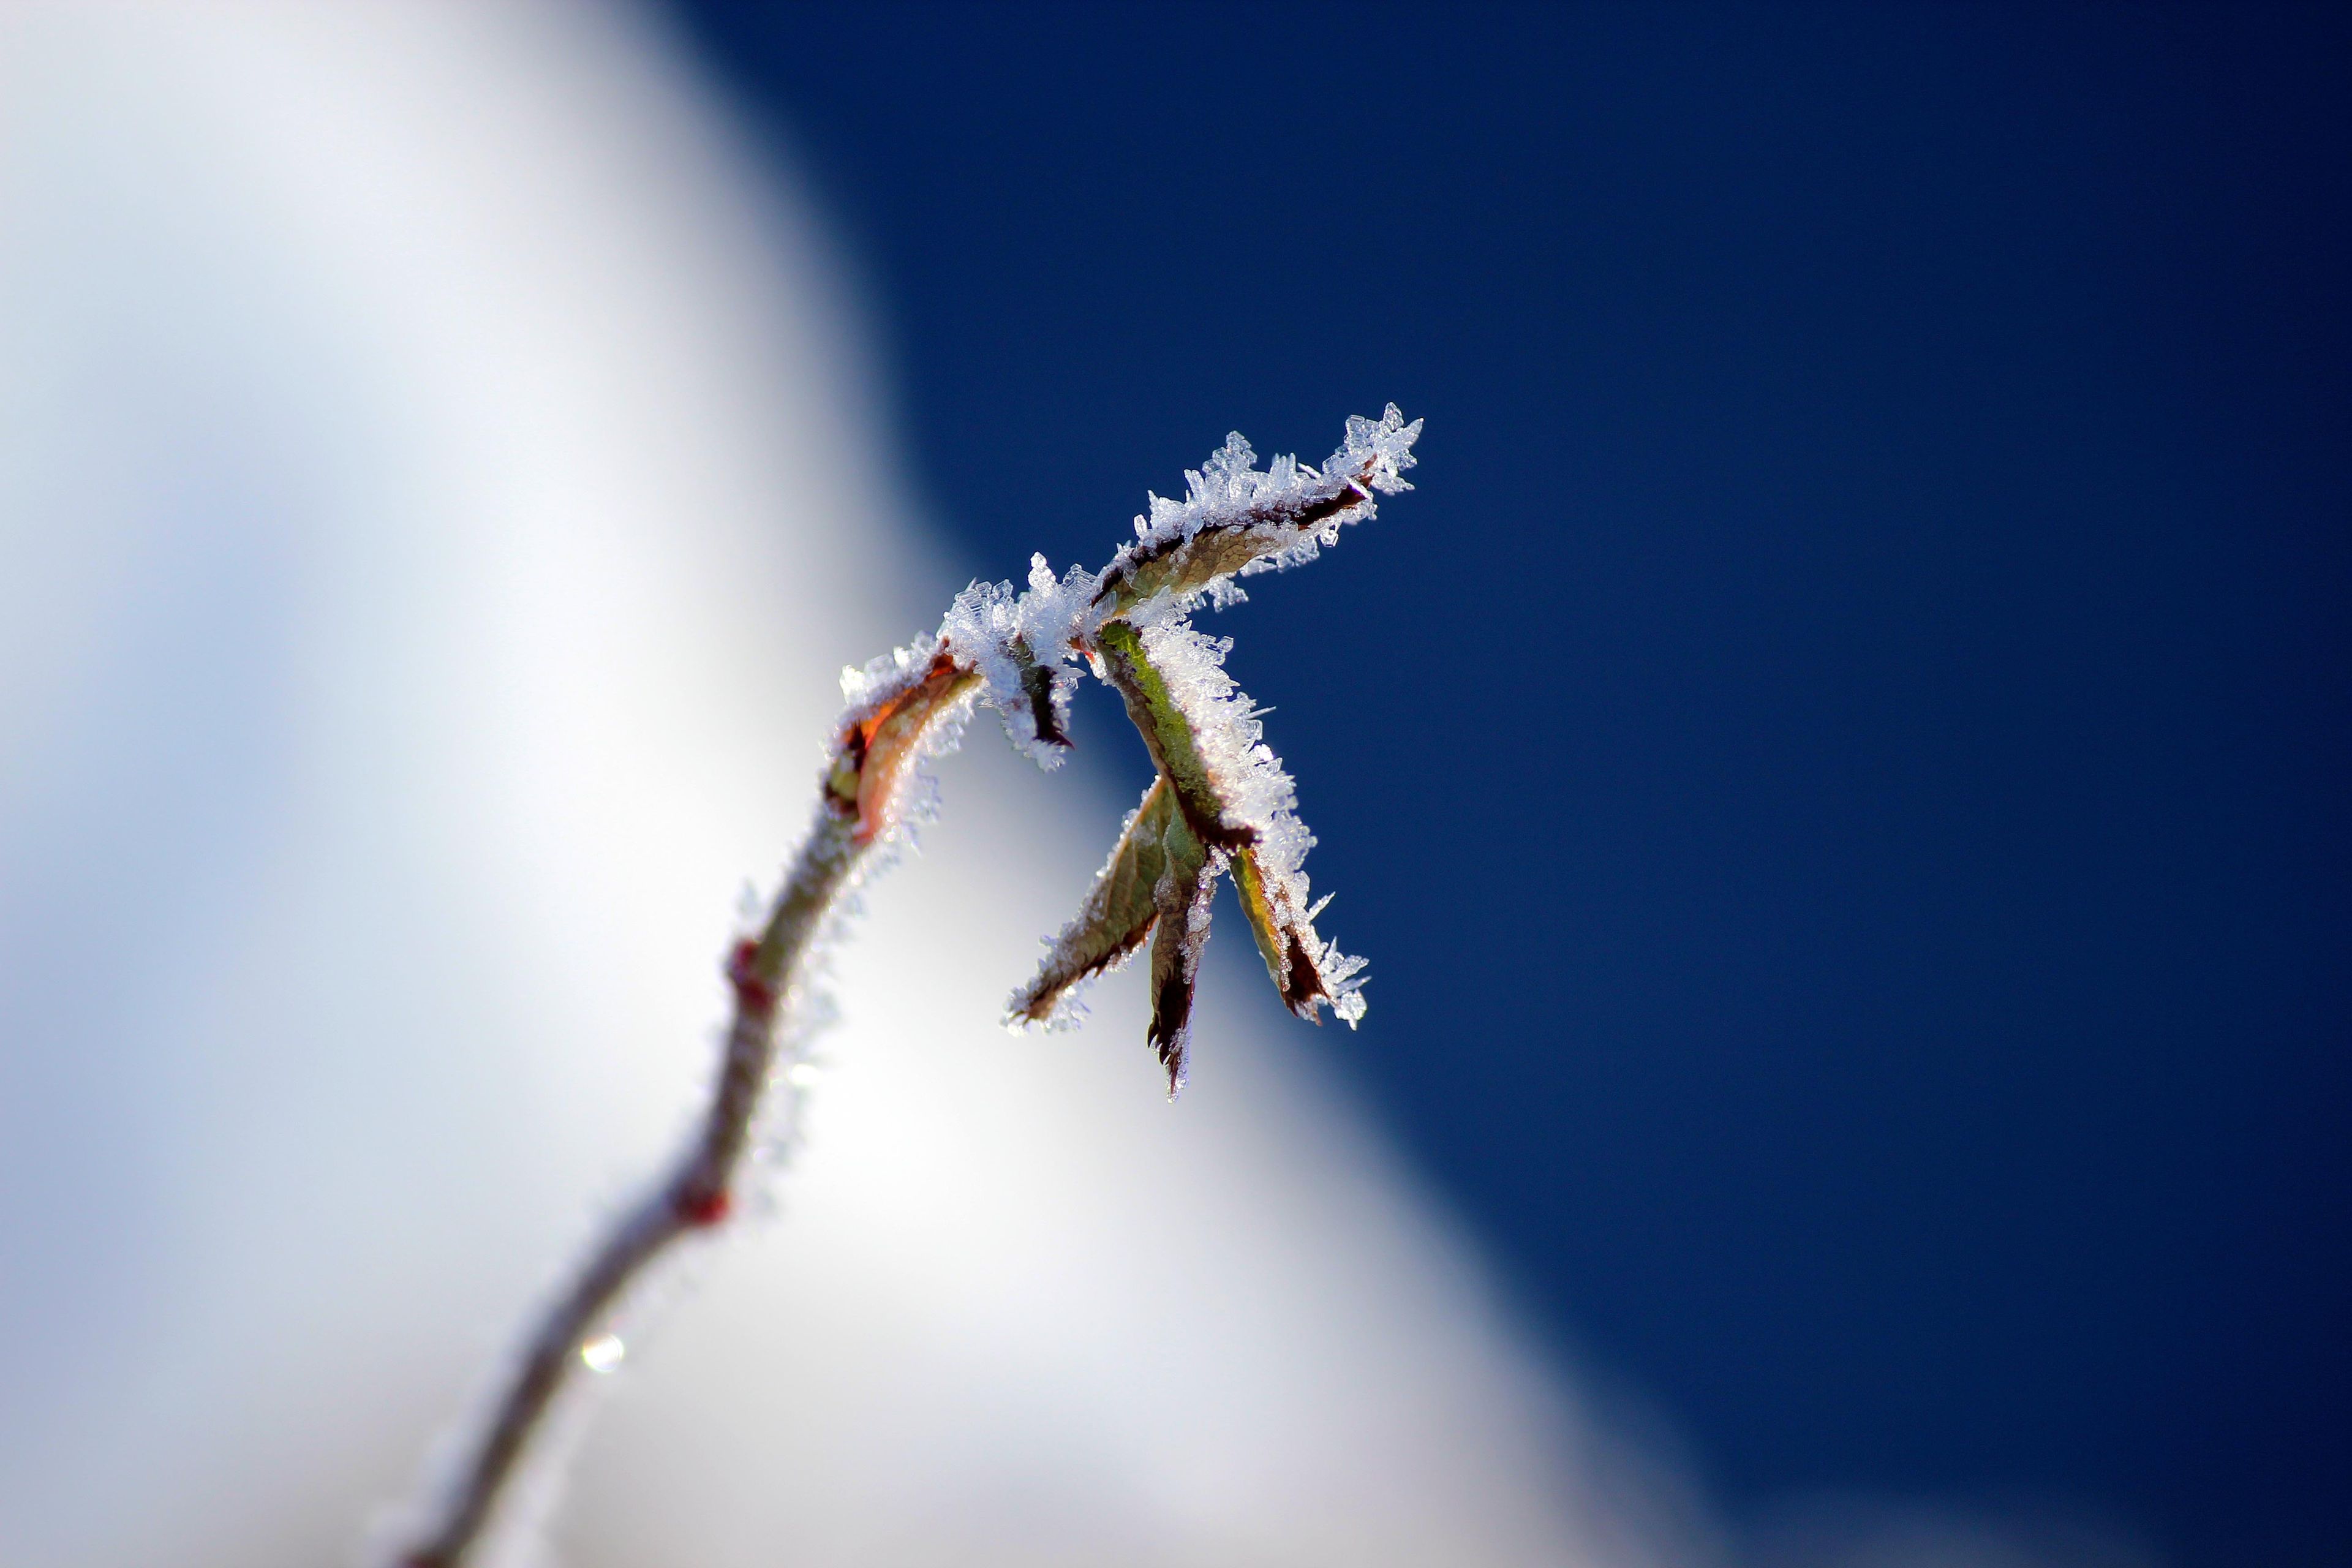 A twig with small leaves is covered in frost.